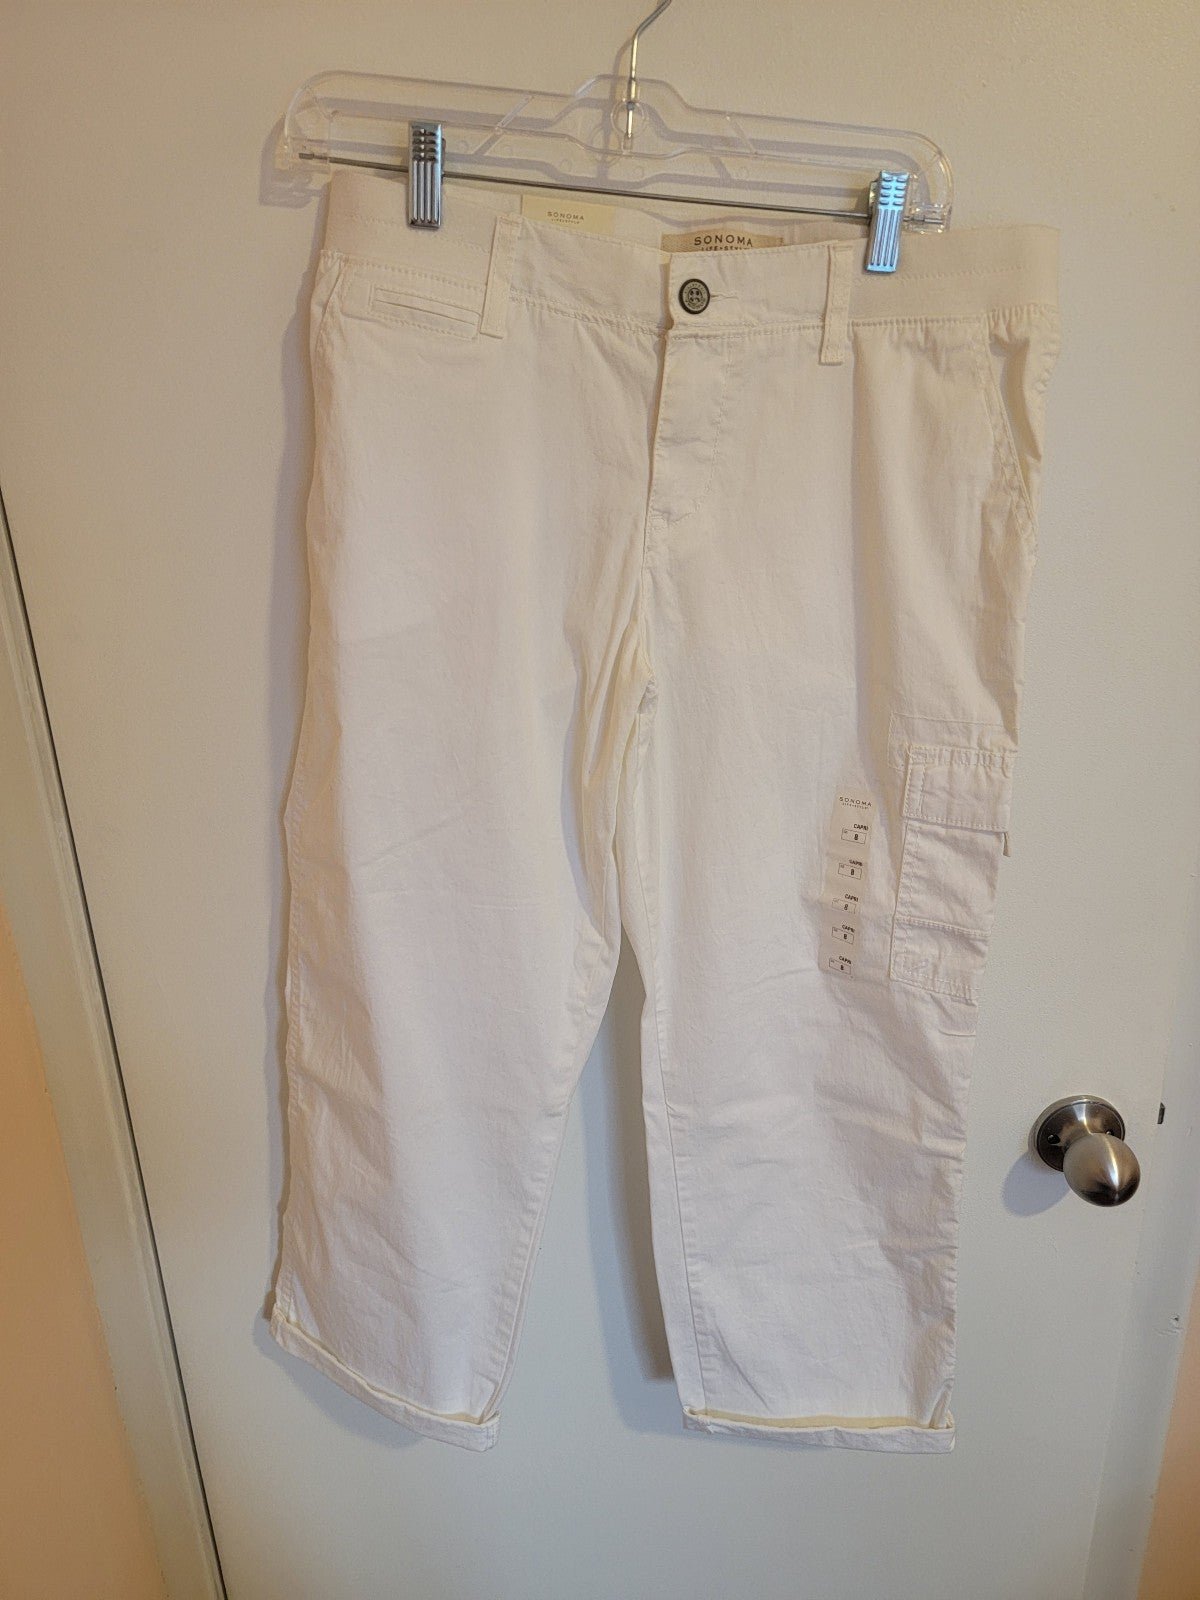 Comfortable Sonoma NWT Mid Rise Capri Size 8 msrp $36 NqLacX4bX US Outlet